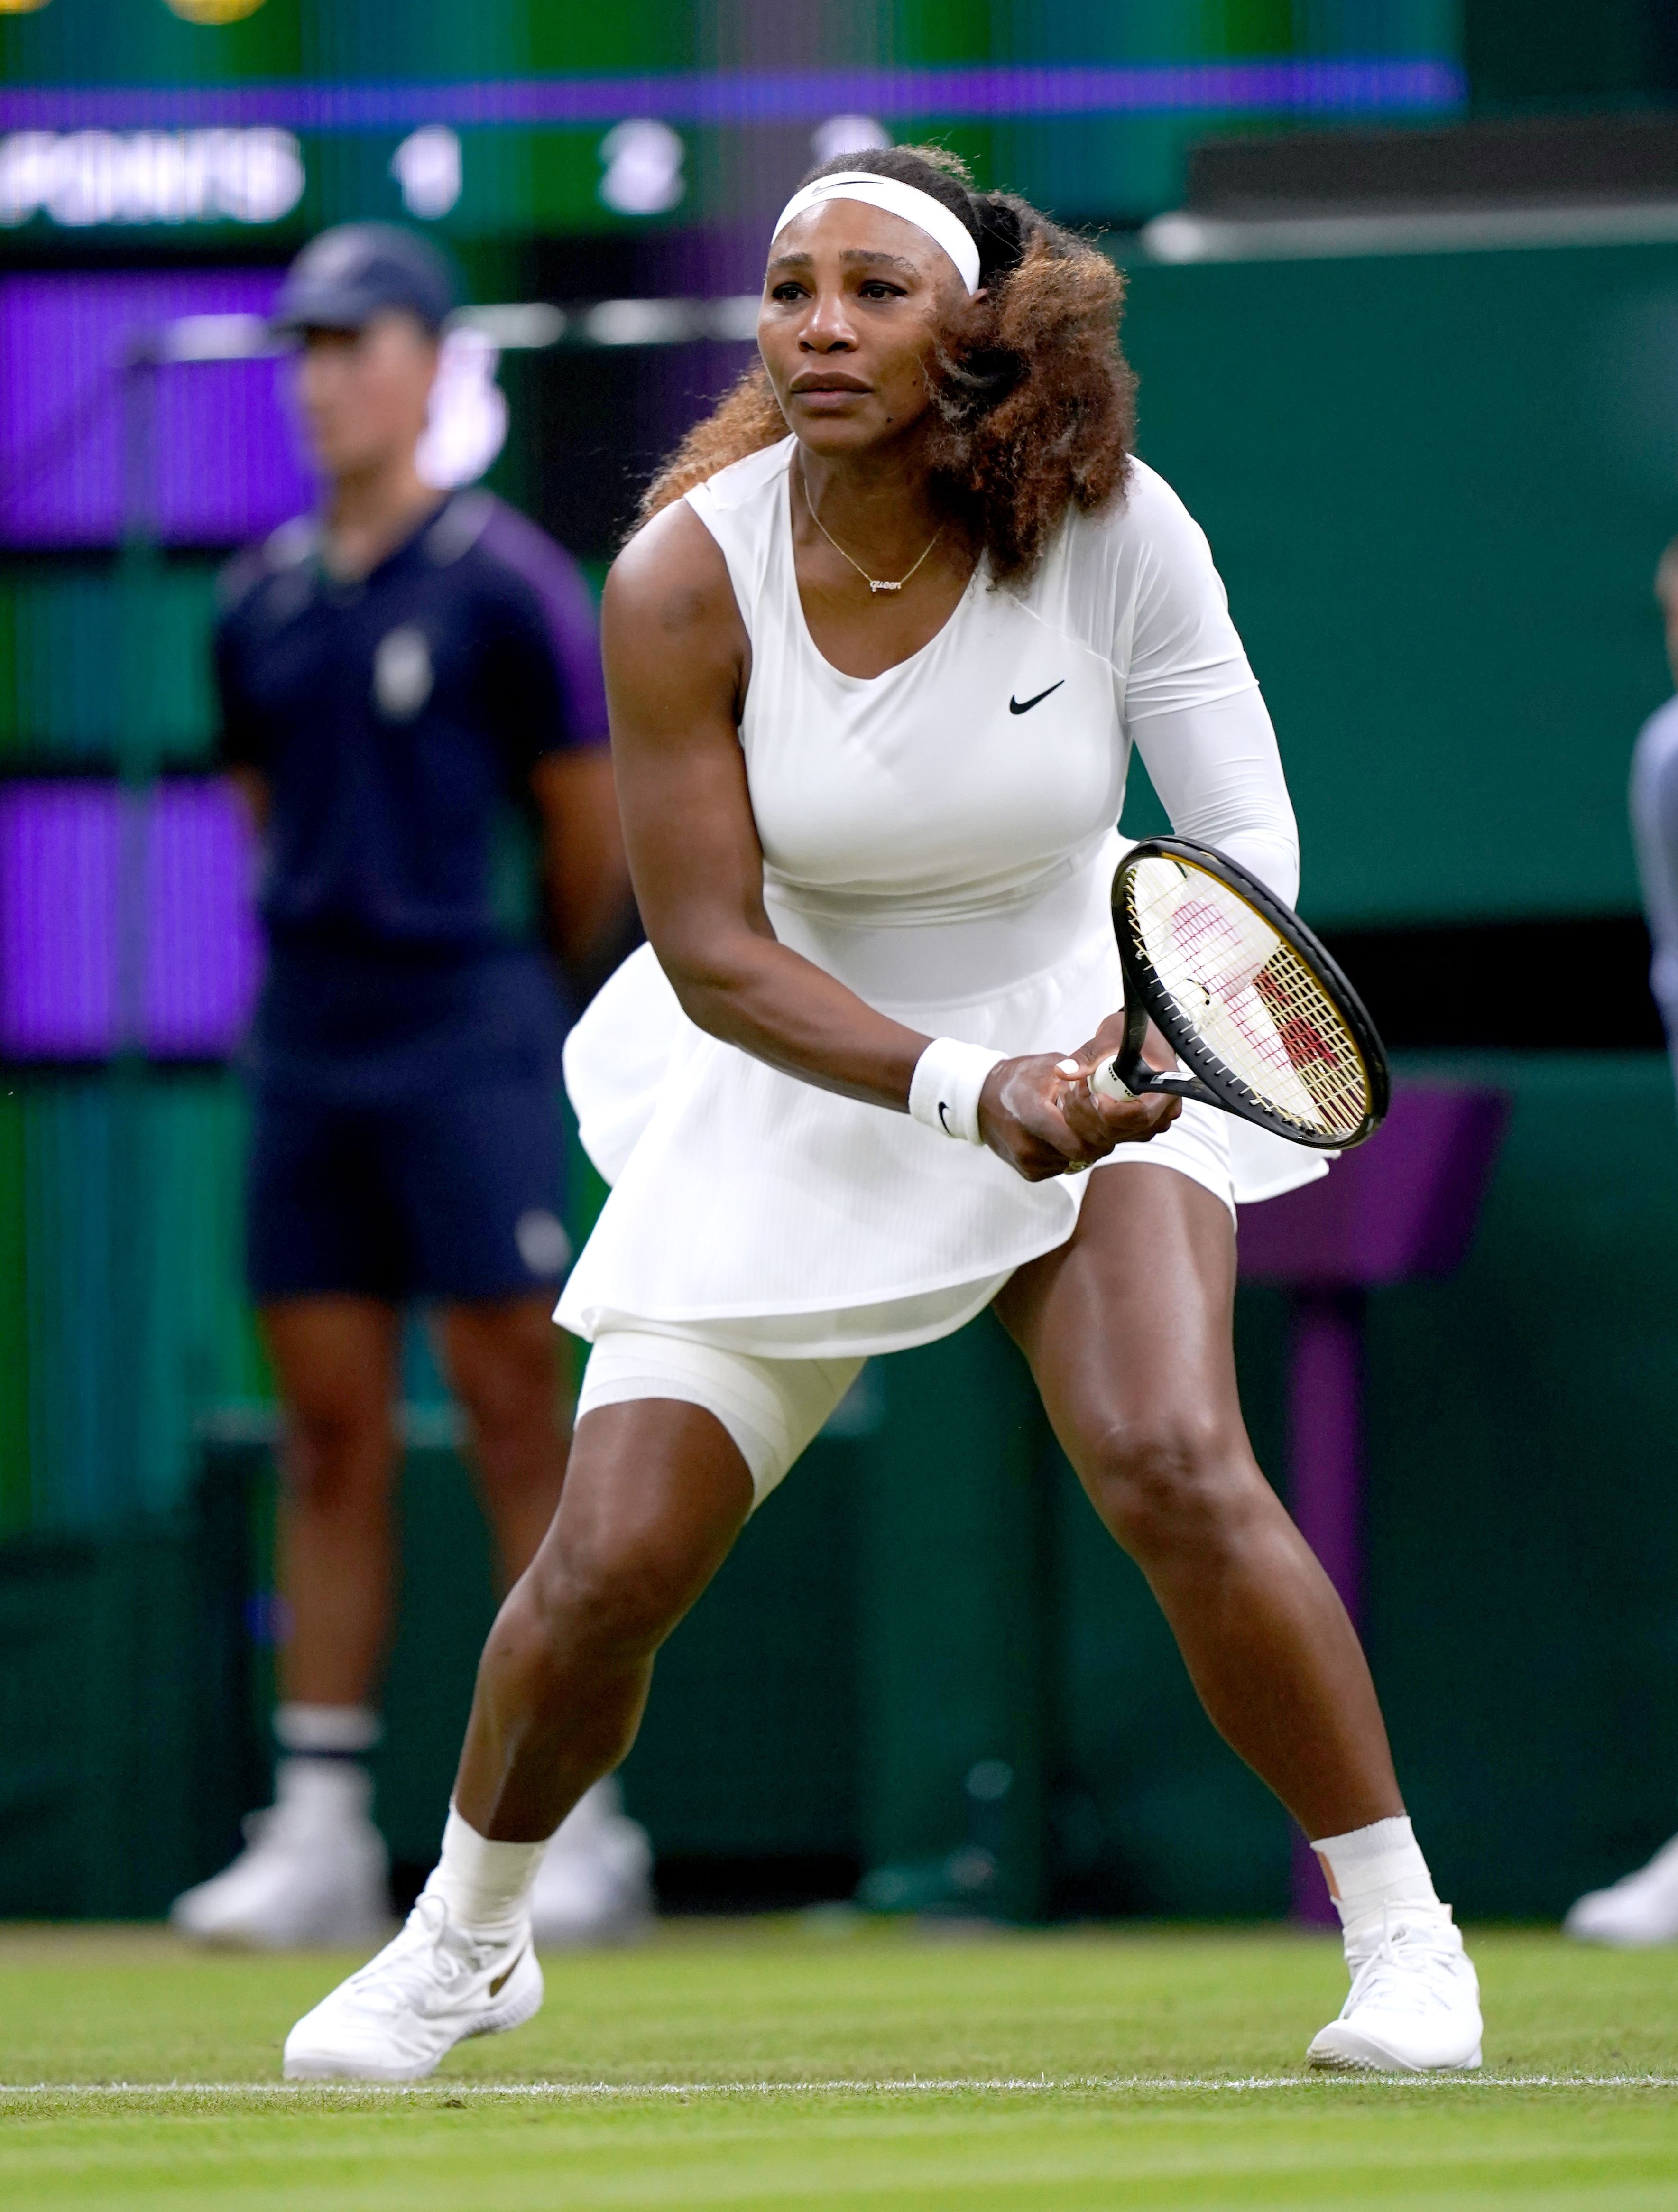 Serena Williams at Wimbledon at The All England Lawn Tennis and Croquet Club on June 29, 2021. | Source: Adam Davy/PA Images/Getty Images